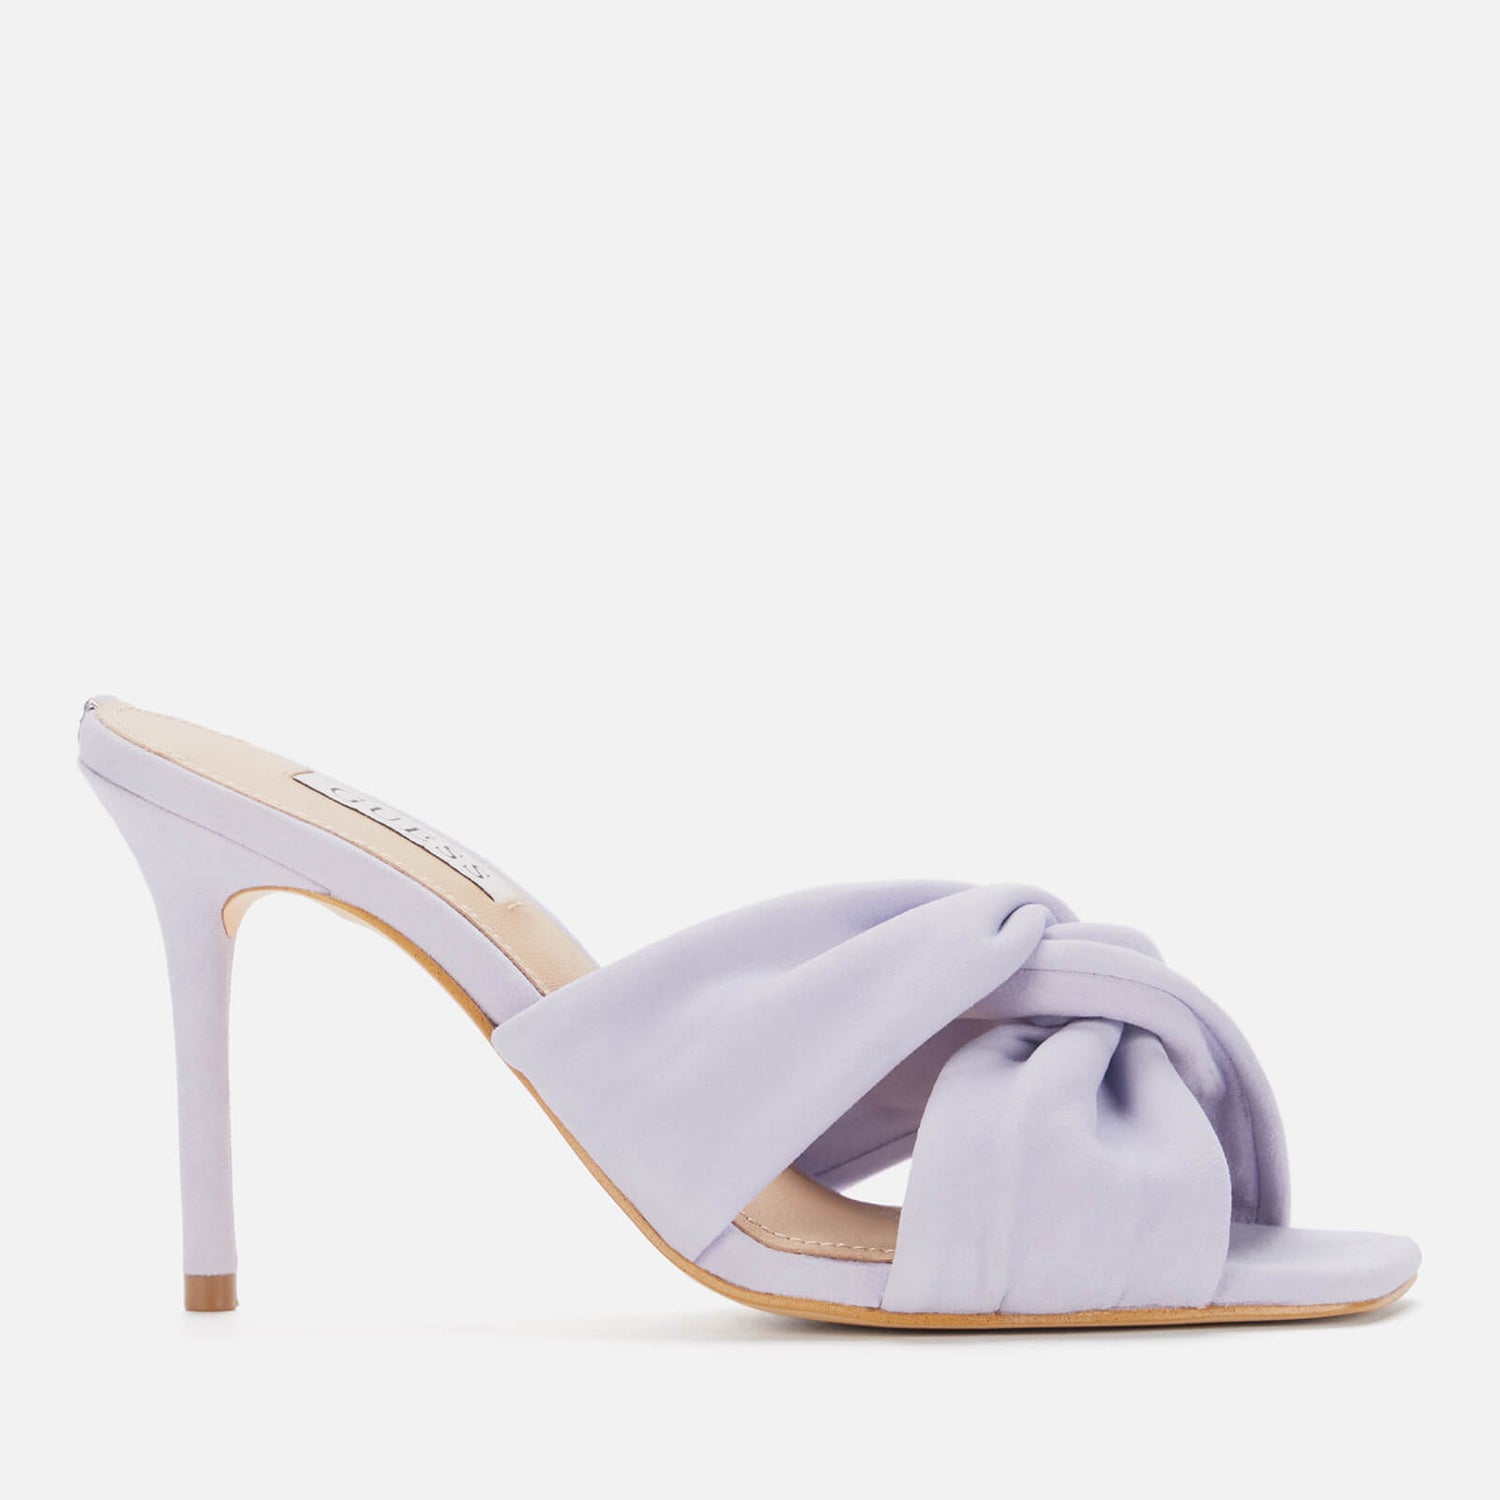 Guess Women's Daiva Suede Heeled Mules - Lilac - UK 3